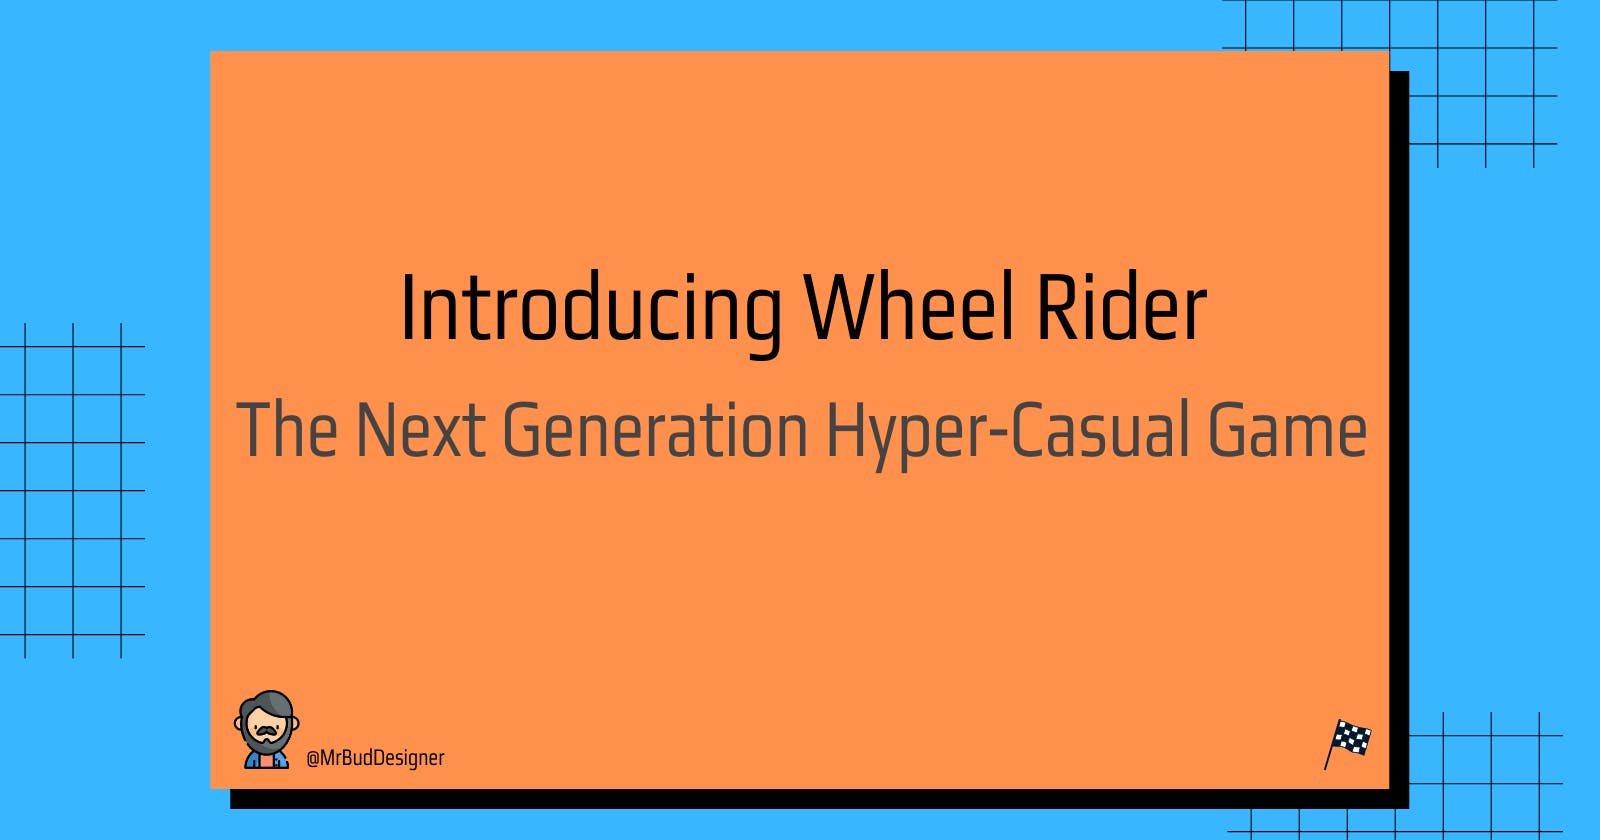 Introducing Wheel Rider: The Next Generation Hyper-Casual Game